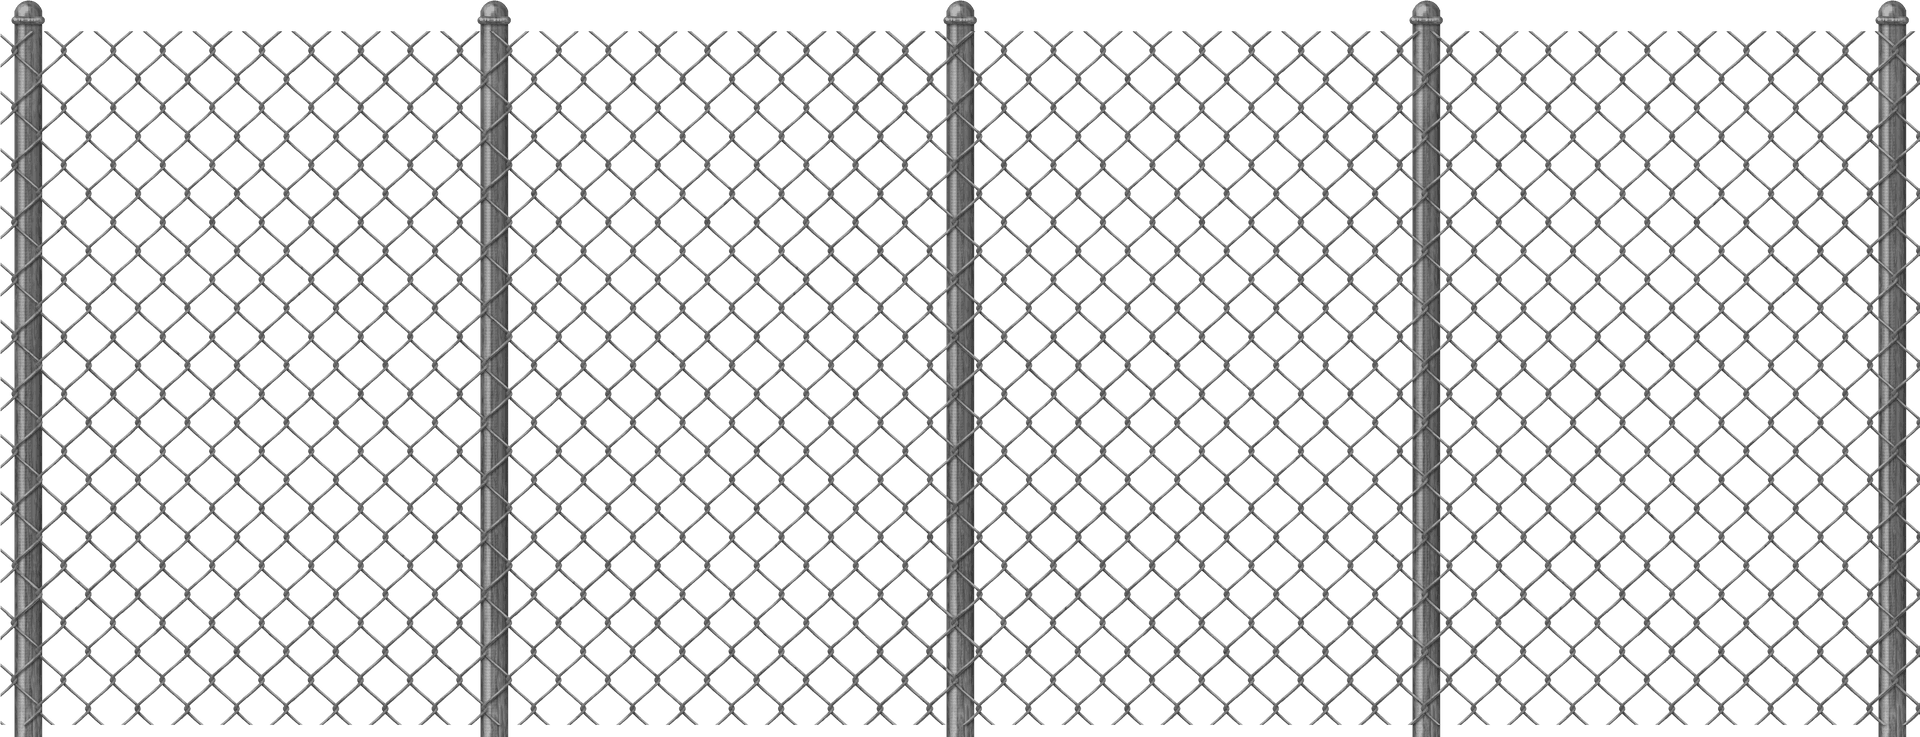 Chain Link Fence Texture PNG